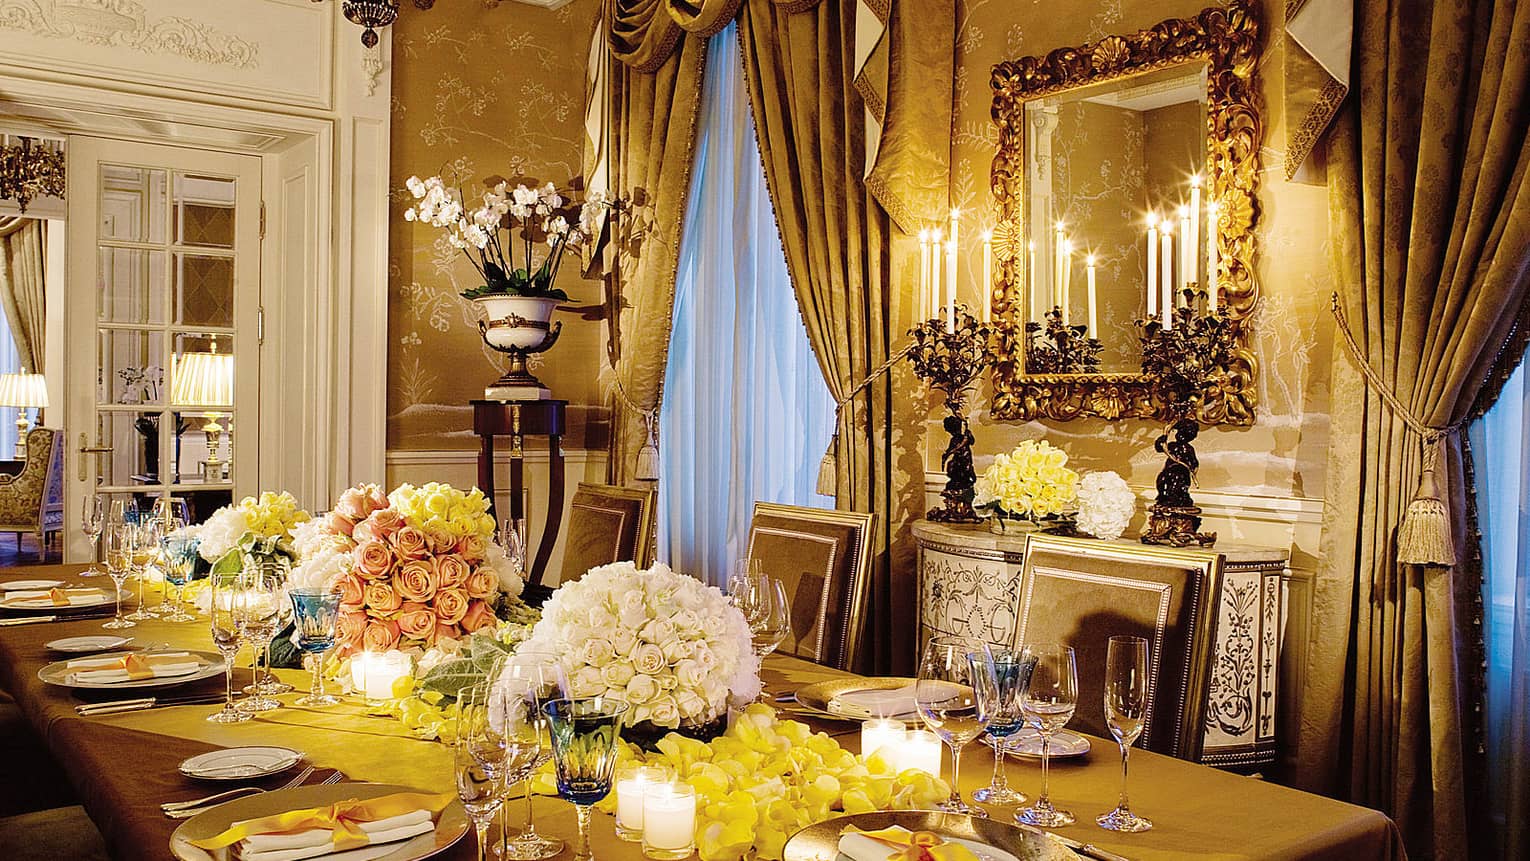 Royal Suite private dining table with glowing candles, flowers